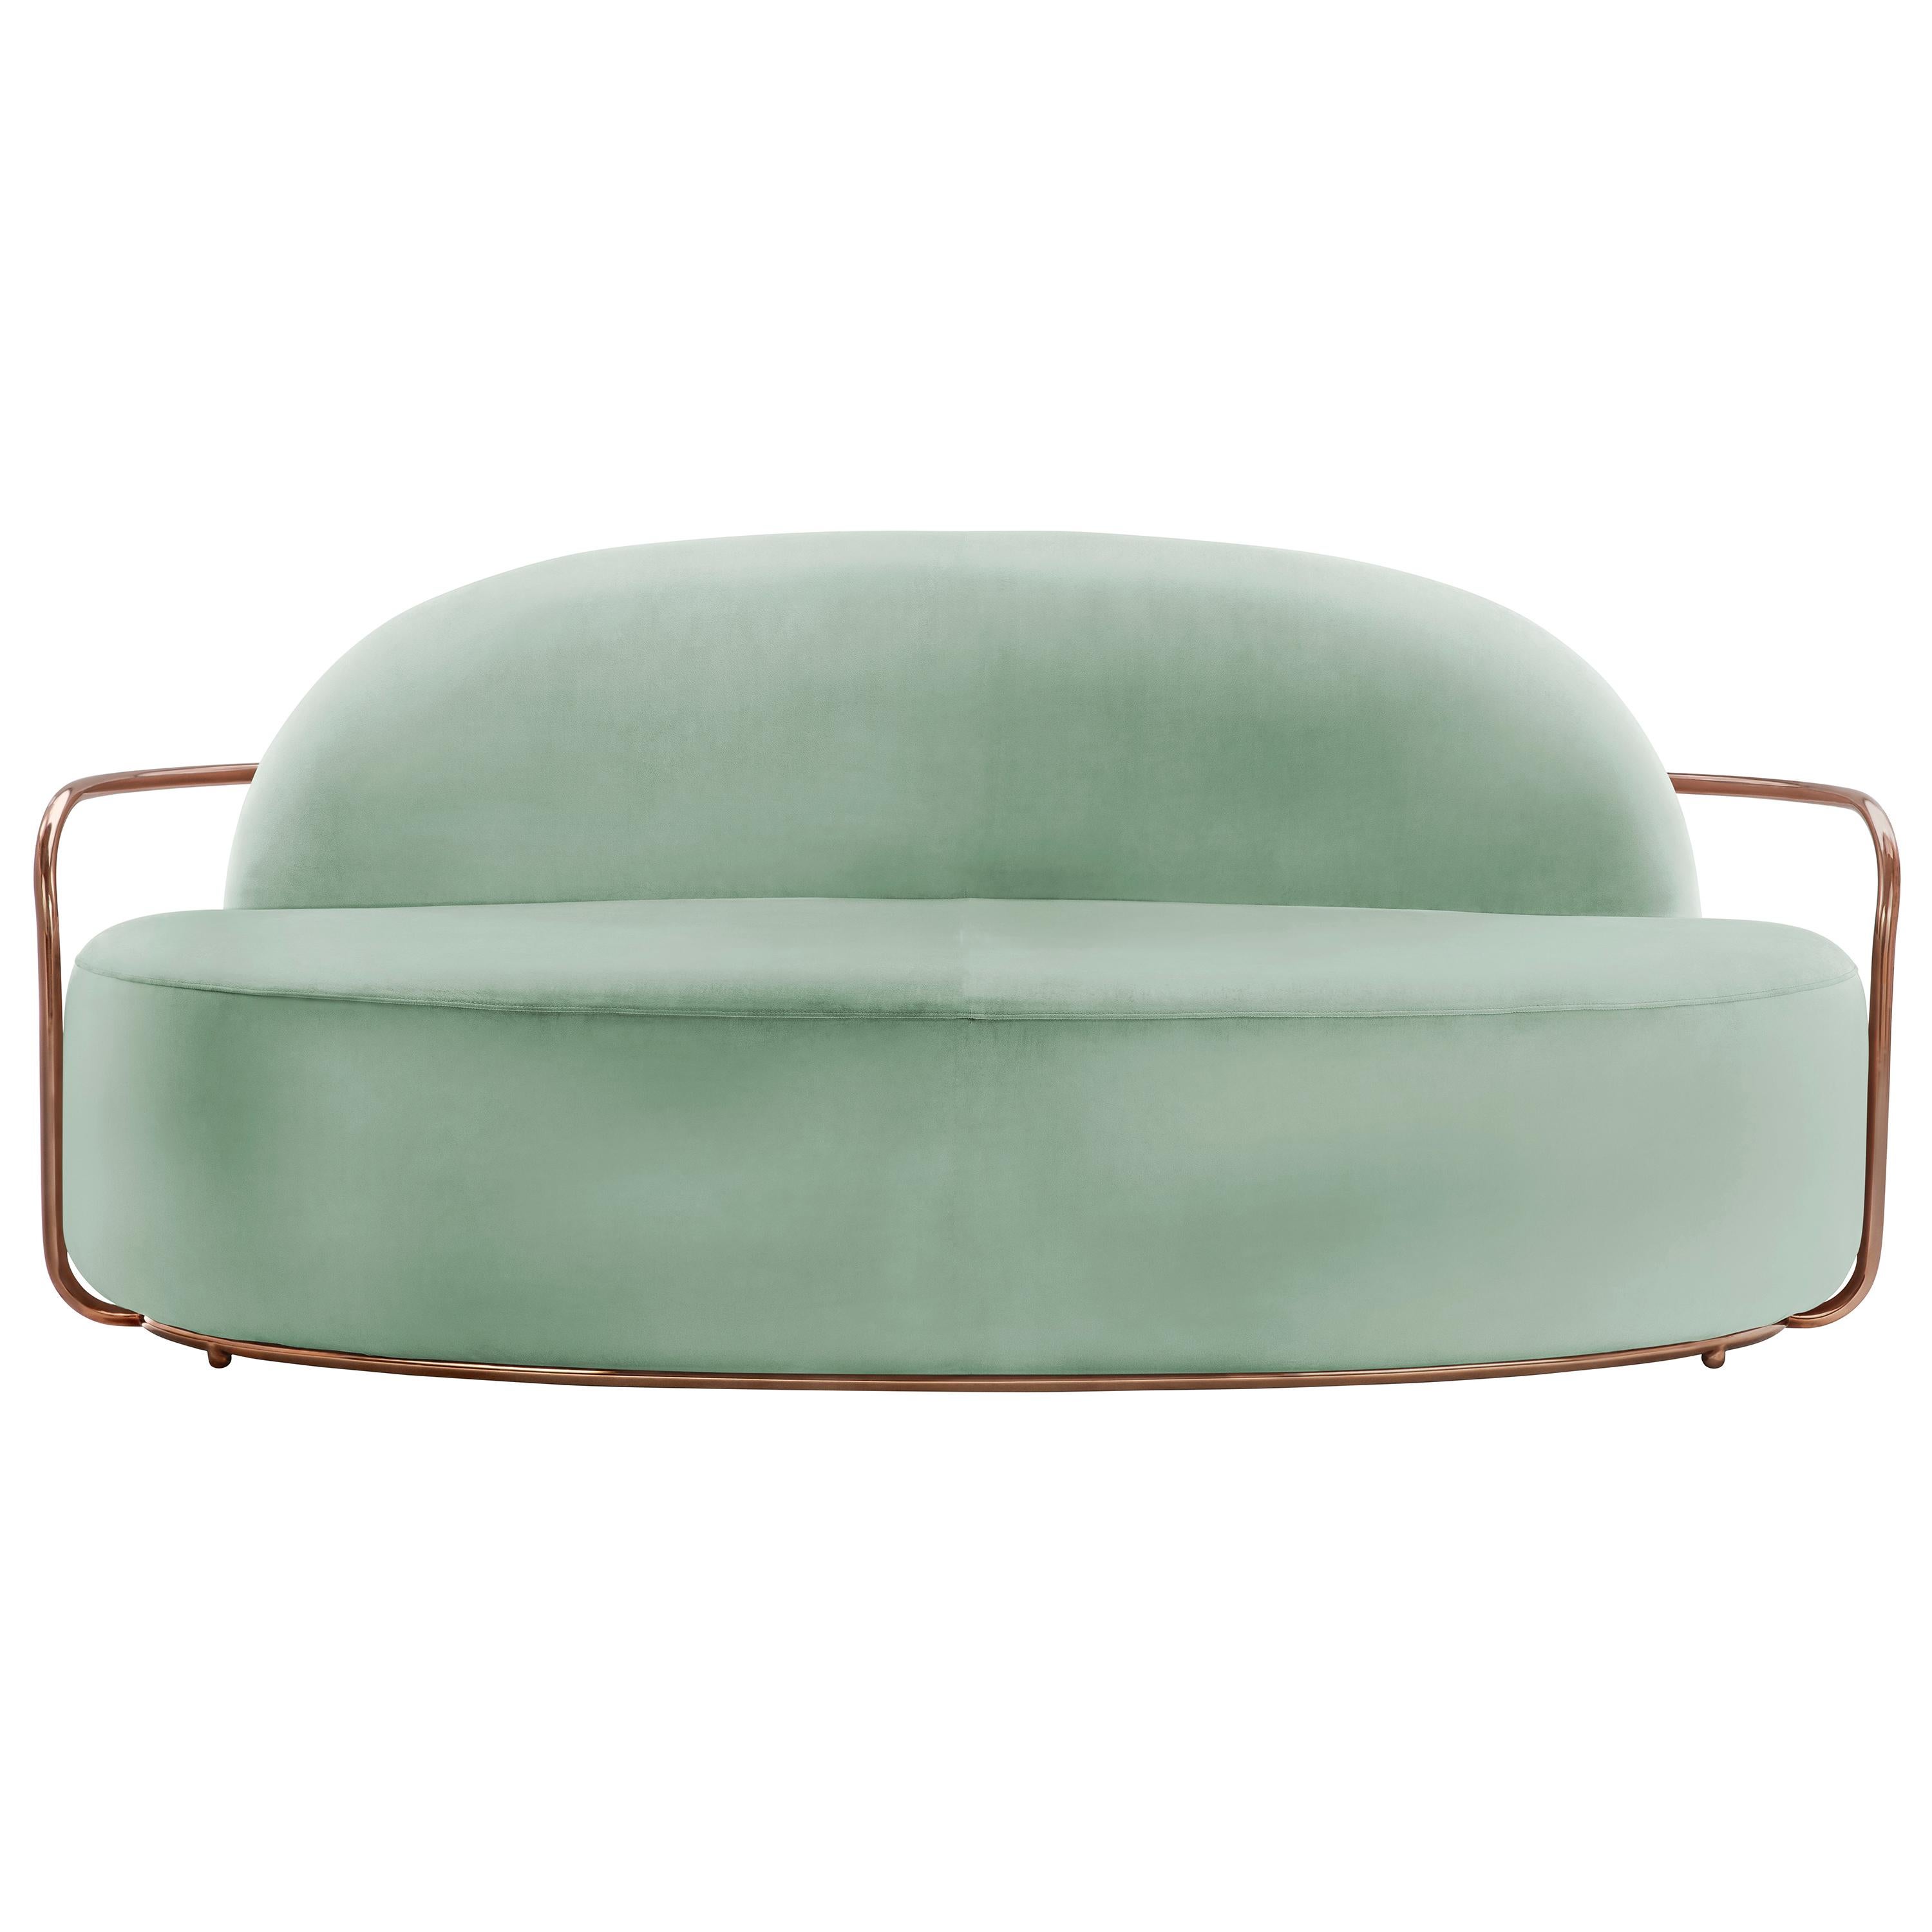 Orion 3 Seat Sofa with Plush Mint Green Velvet and Rose Gold Arms by Nika Zupanc For Sale